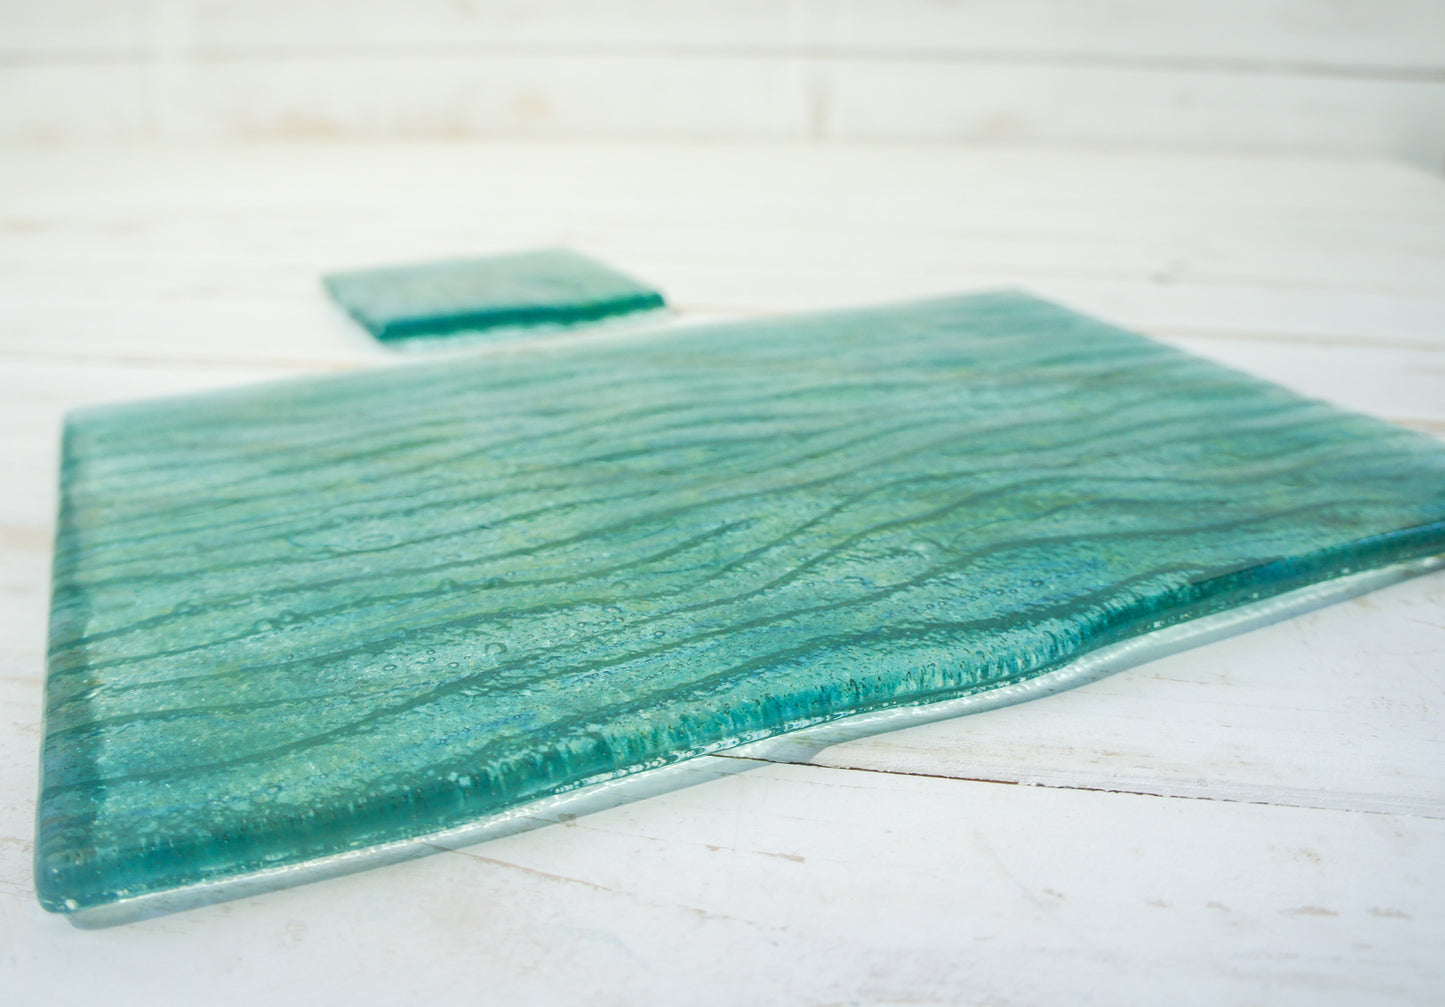 Placemat + Coaster - Seabed Turquoise Placemat 30x20cm(11 3/4 x 8 1/4") + matching coaster 10x10cm (4")